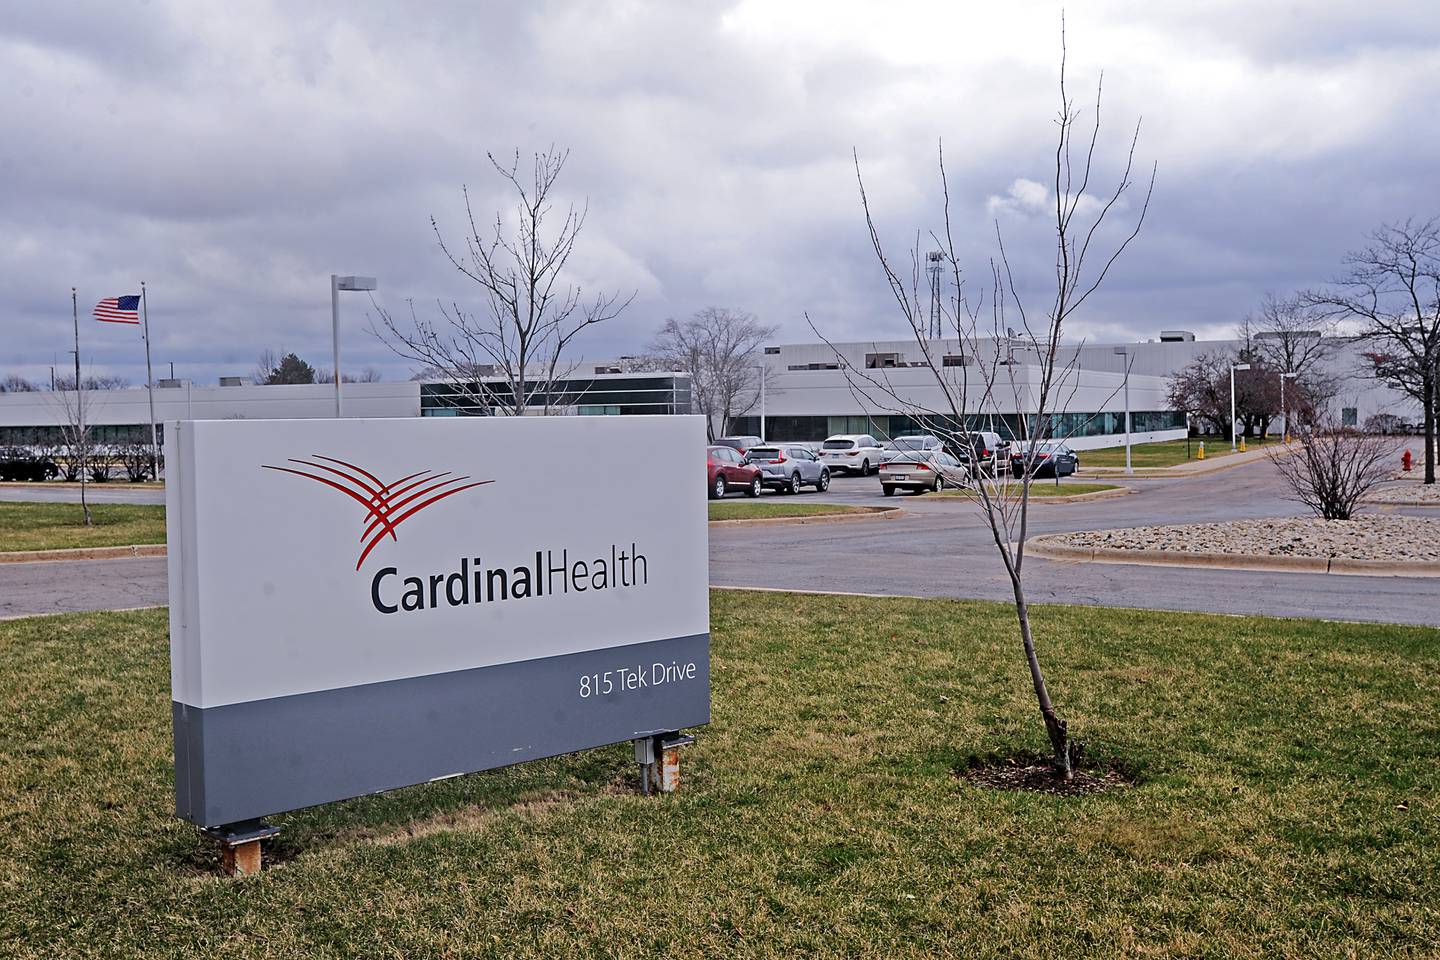 Cardinal Health plans to close its facility at 815 Tek Drive in Crystal Lake in mid-2023, a company official said.